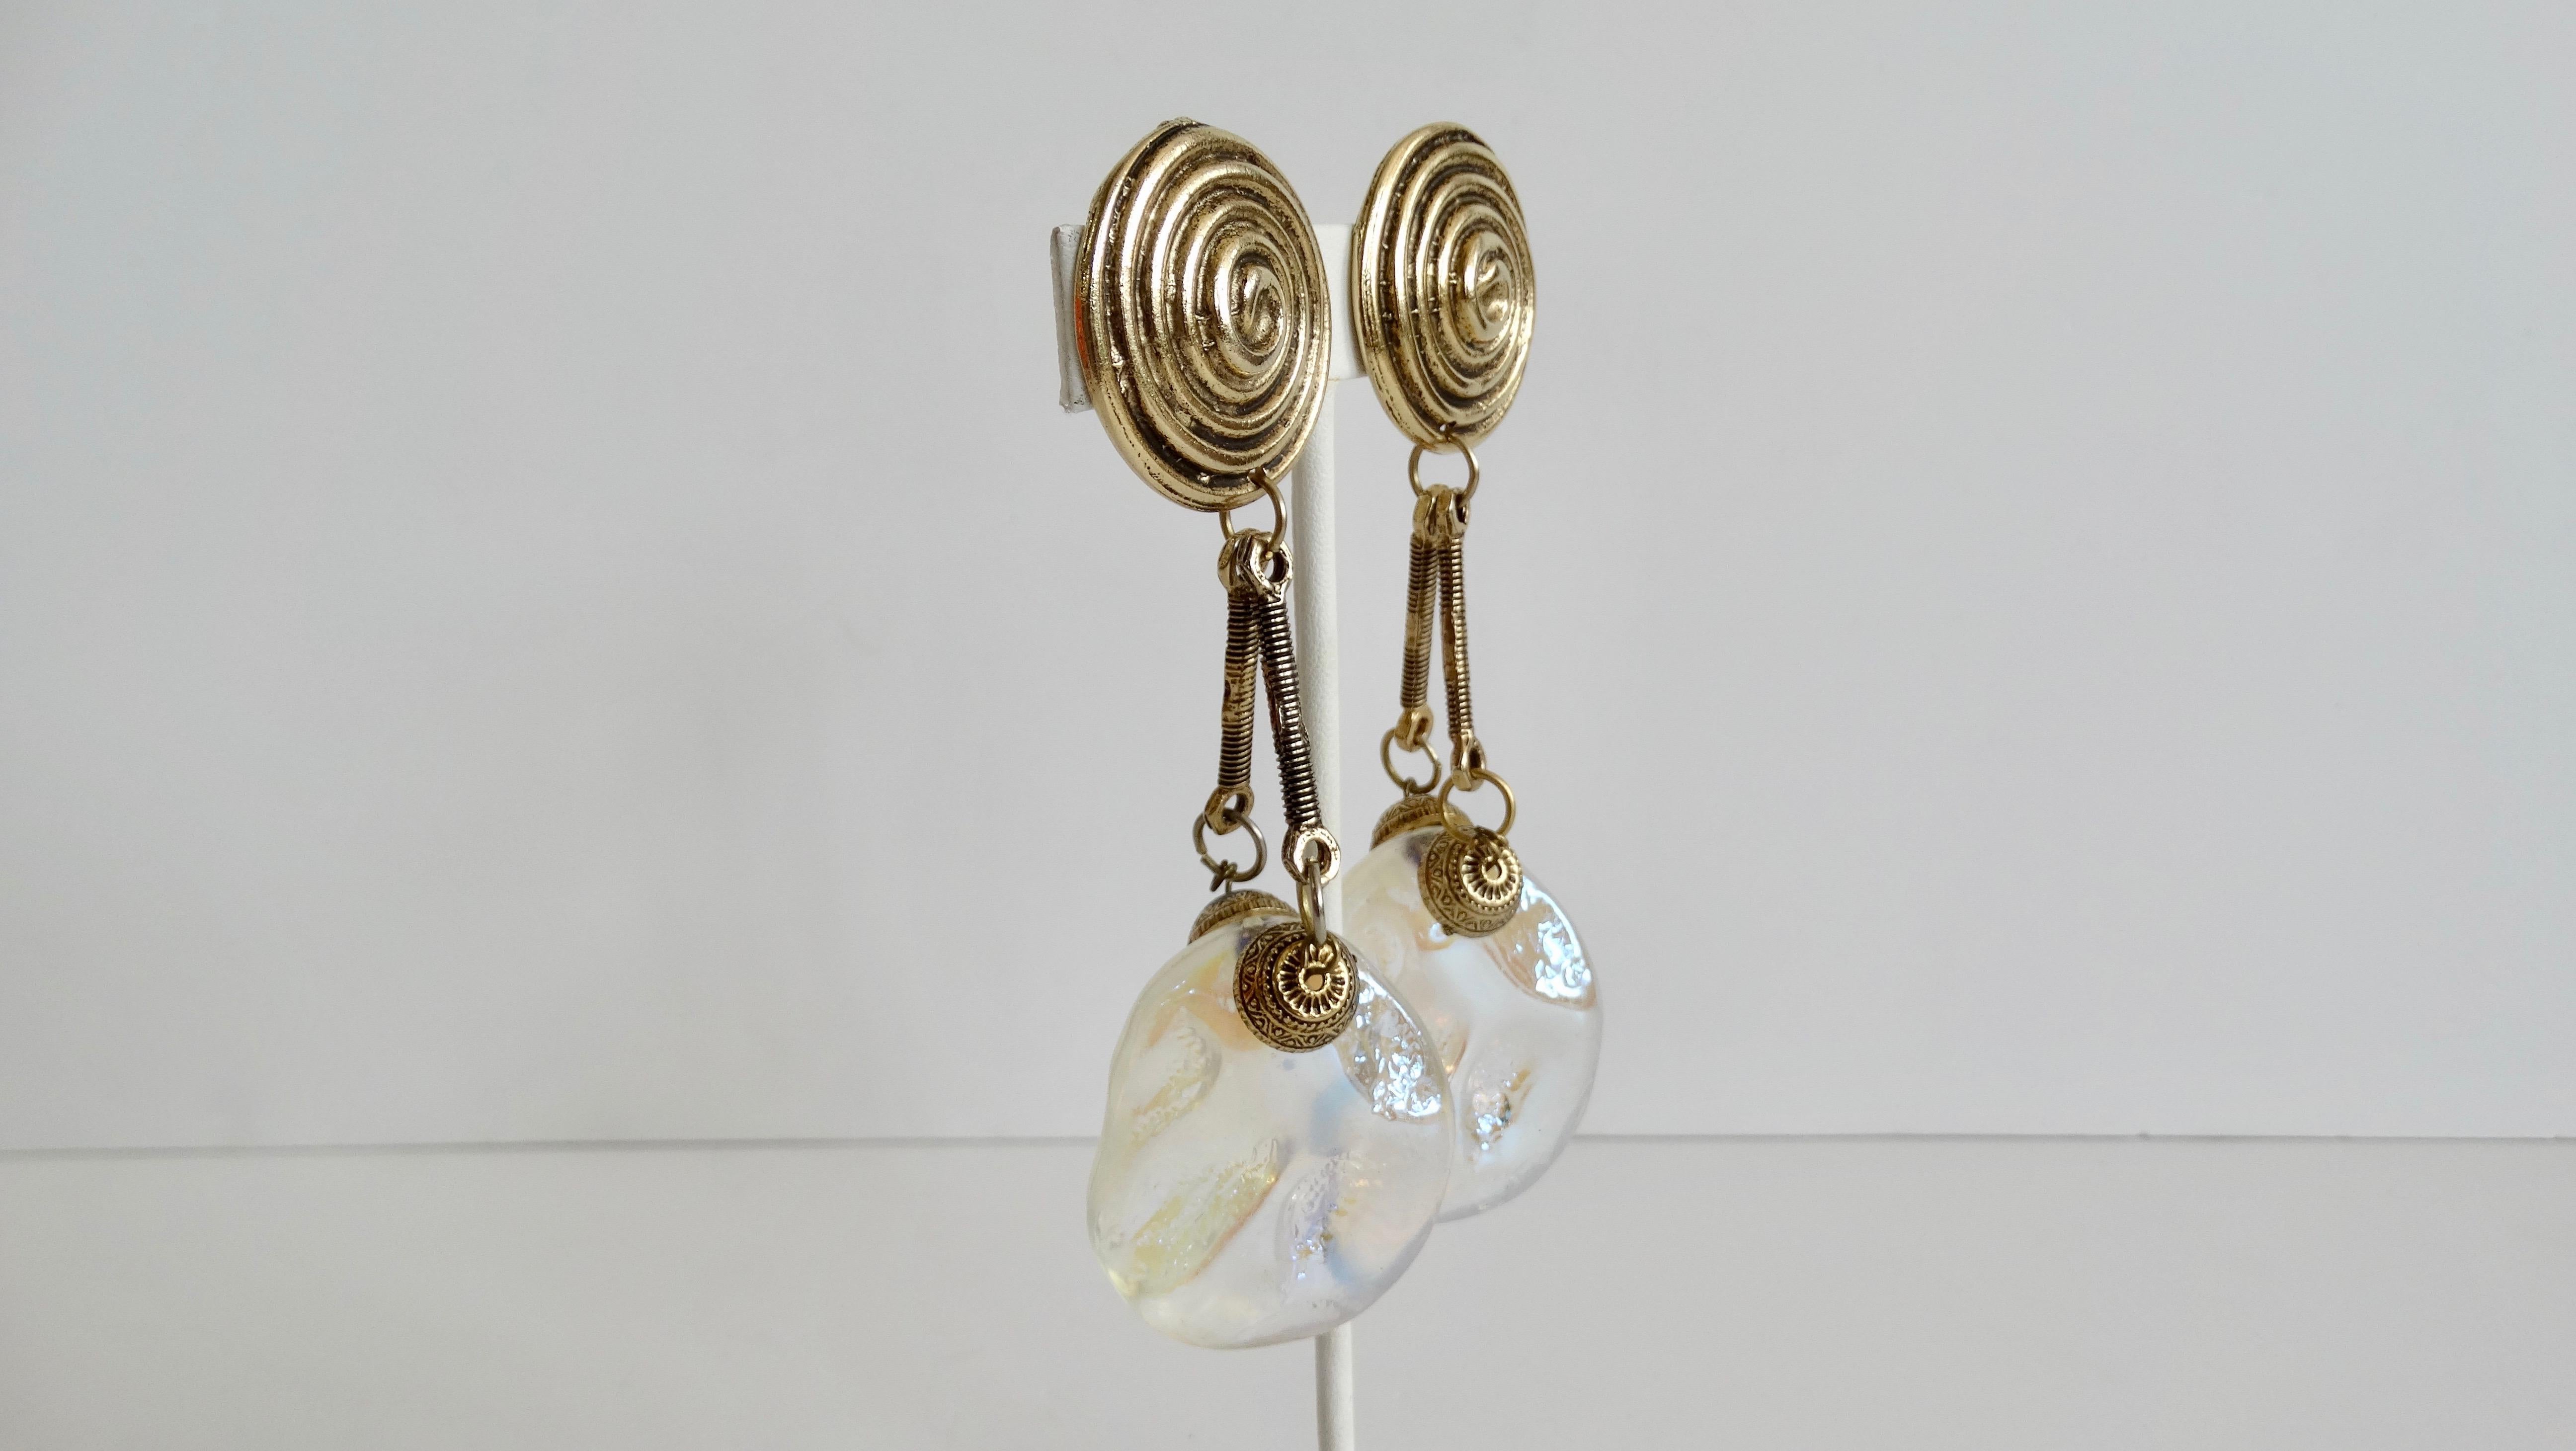 Show off your love for vintage treasures with these amazing statement earrings! Circa 1980s, these abstract dangle earrings feature brass plated hardware and a large acrylic faux moonstone bead. Includes a swirl patterned clip-on closure and